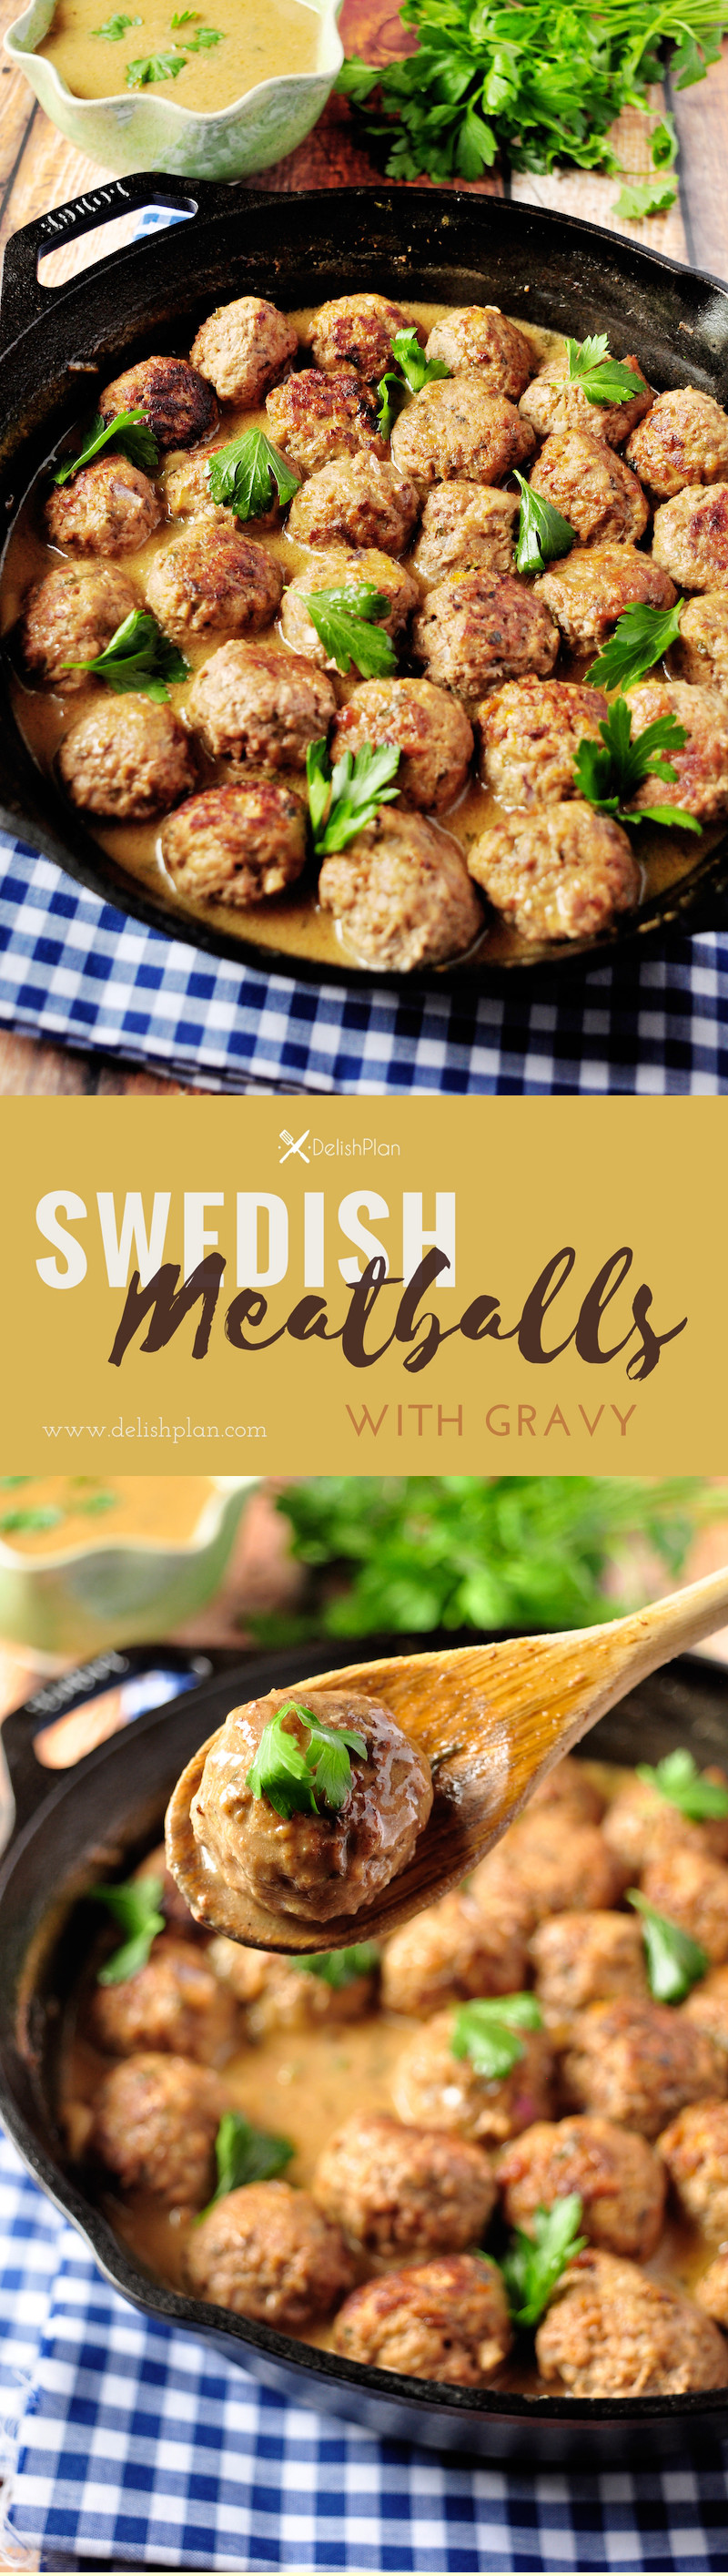 Have you had the famous IKEA meatballs? Those Swedish meatballs will certainly remind you of the taste, plus it gives you a lot of yummy gravy.